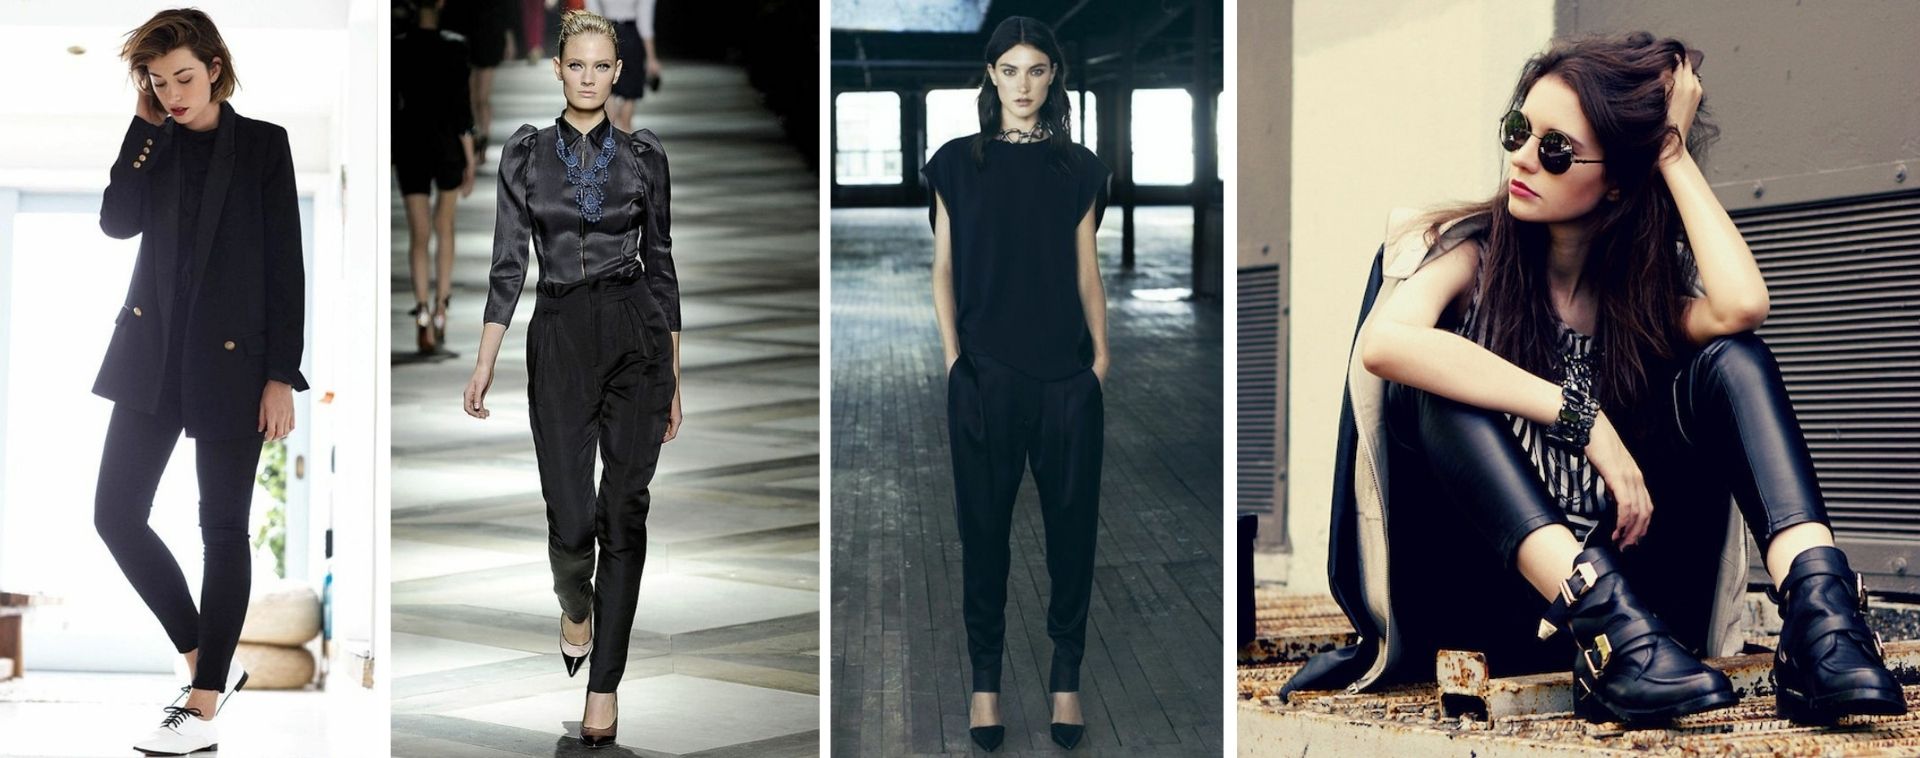 What to wear with black pants? [Women's Fashion Guide]